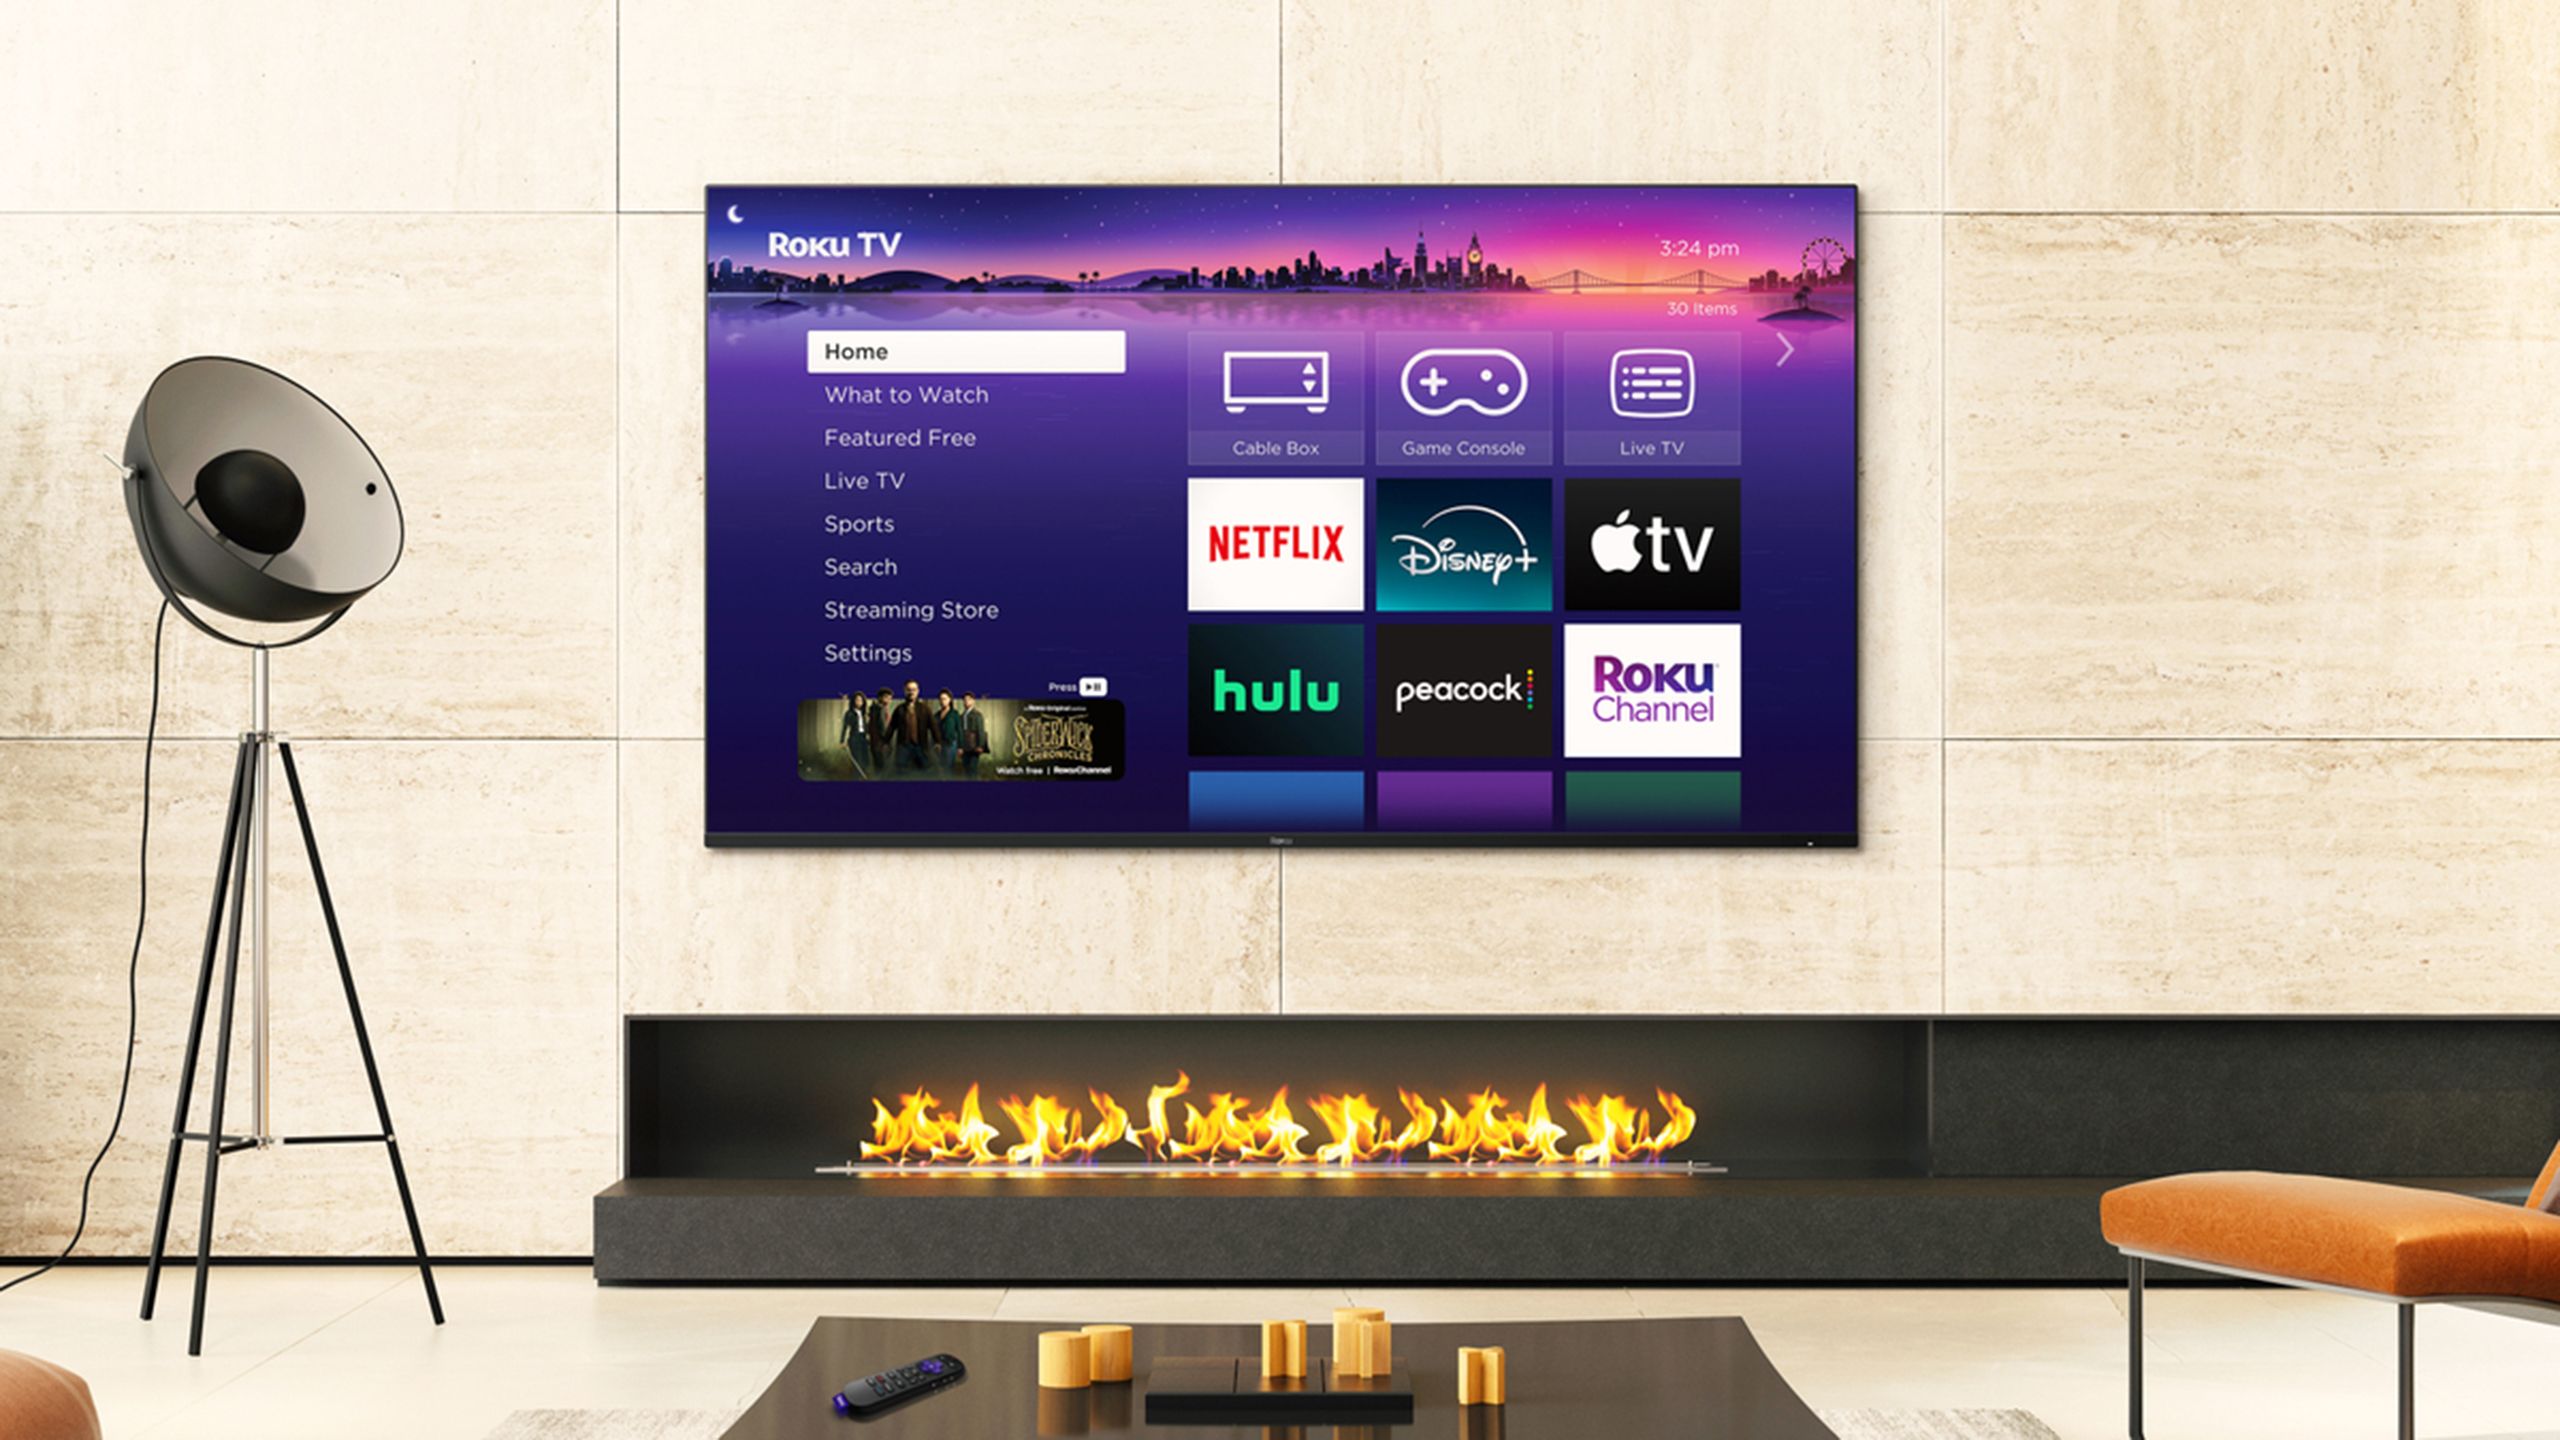 Roku is going to show video ads on its homescreen interface